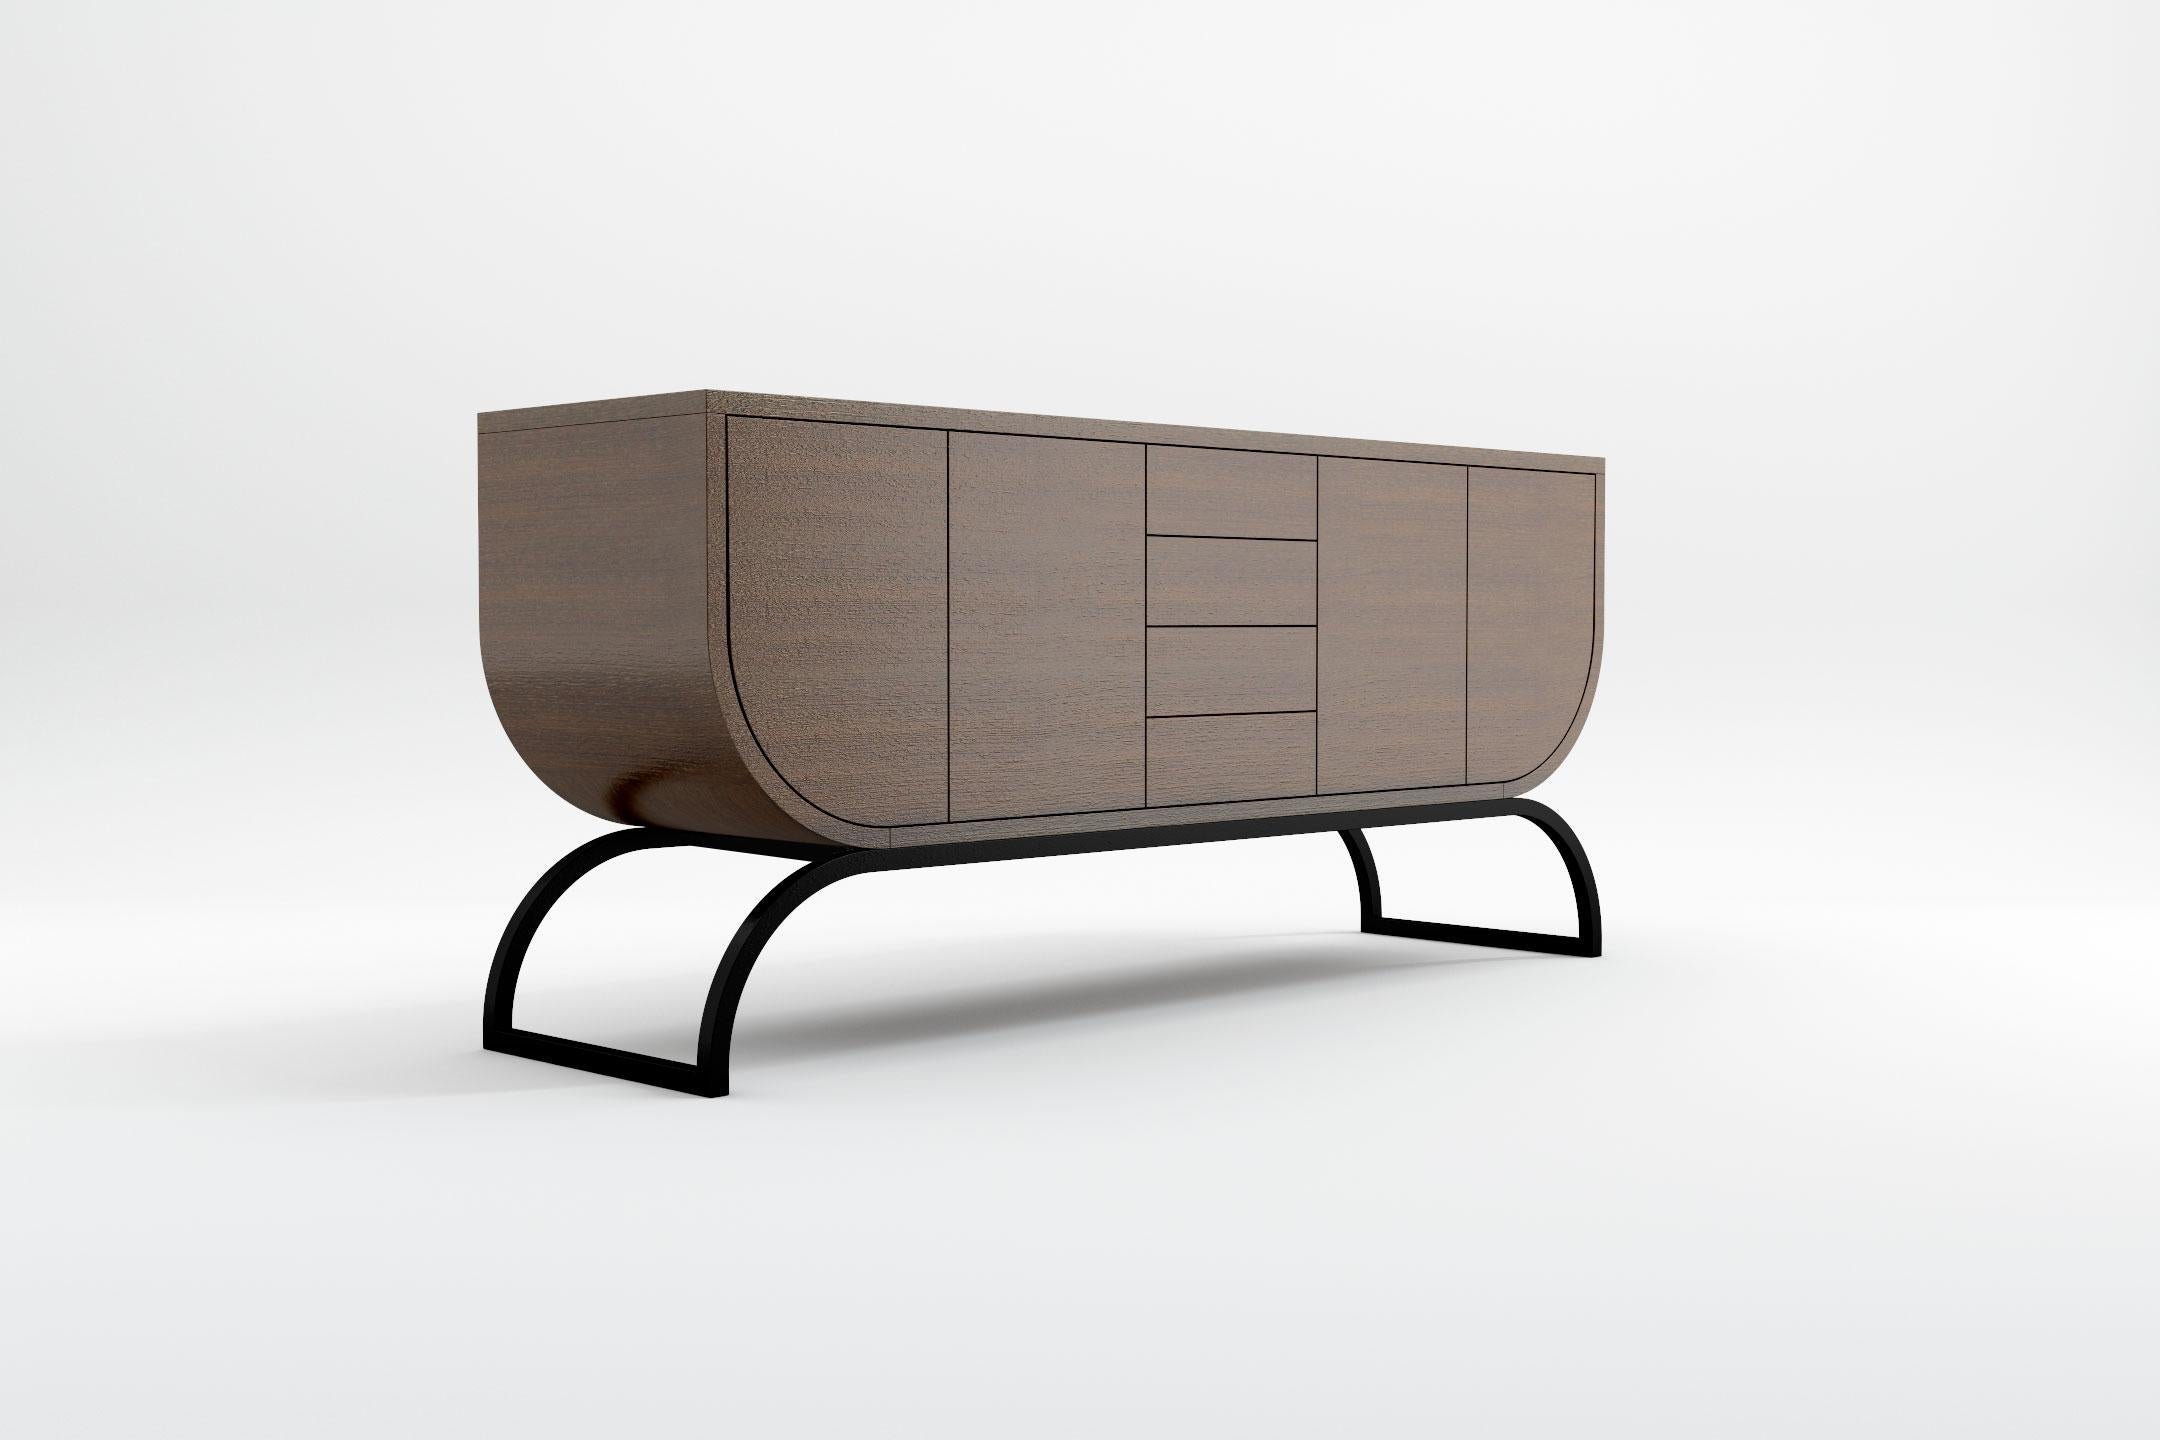 Intertwining wood and wrought iron, the sculptural lines of the Raw collection combine exquisite natural materials with modern Scandinavian shapes to create a breathtaking and unique design. The sideboard comprises five individual doors with